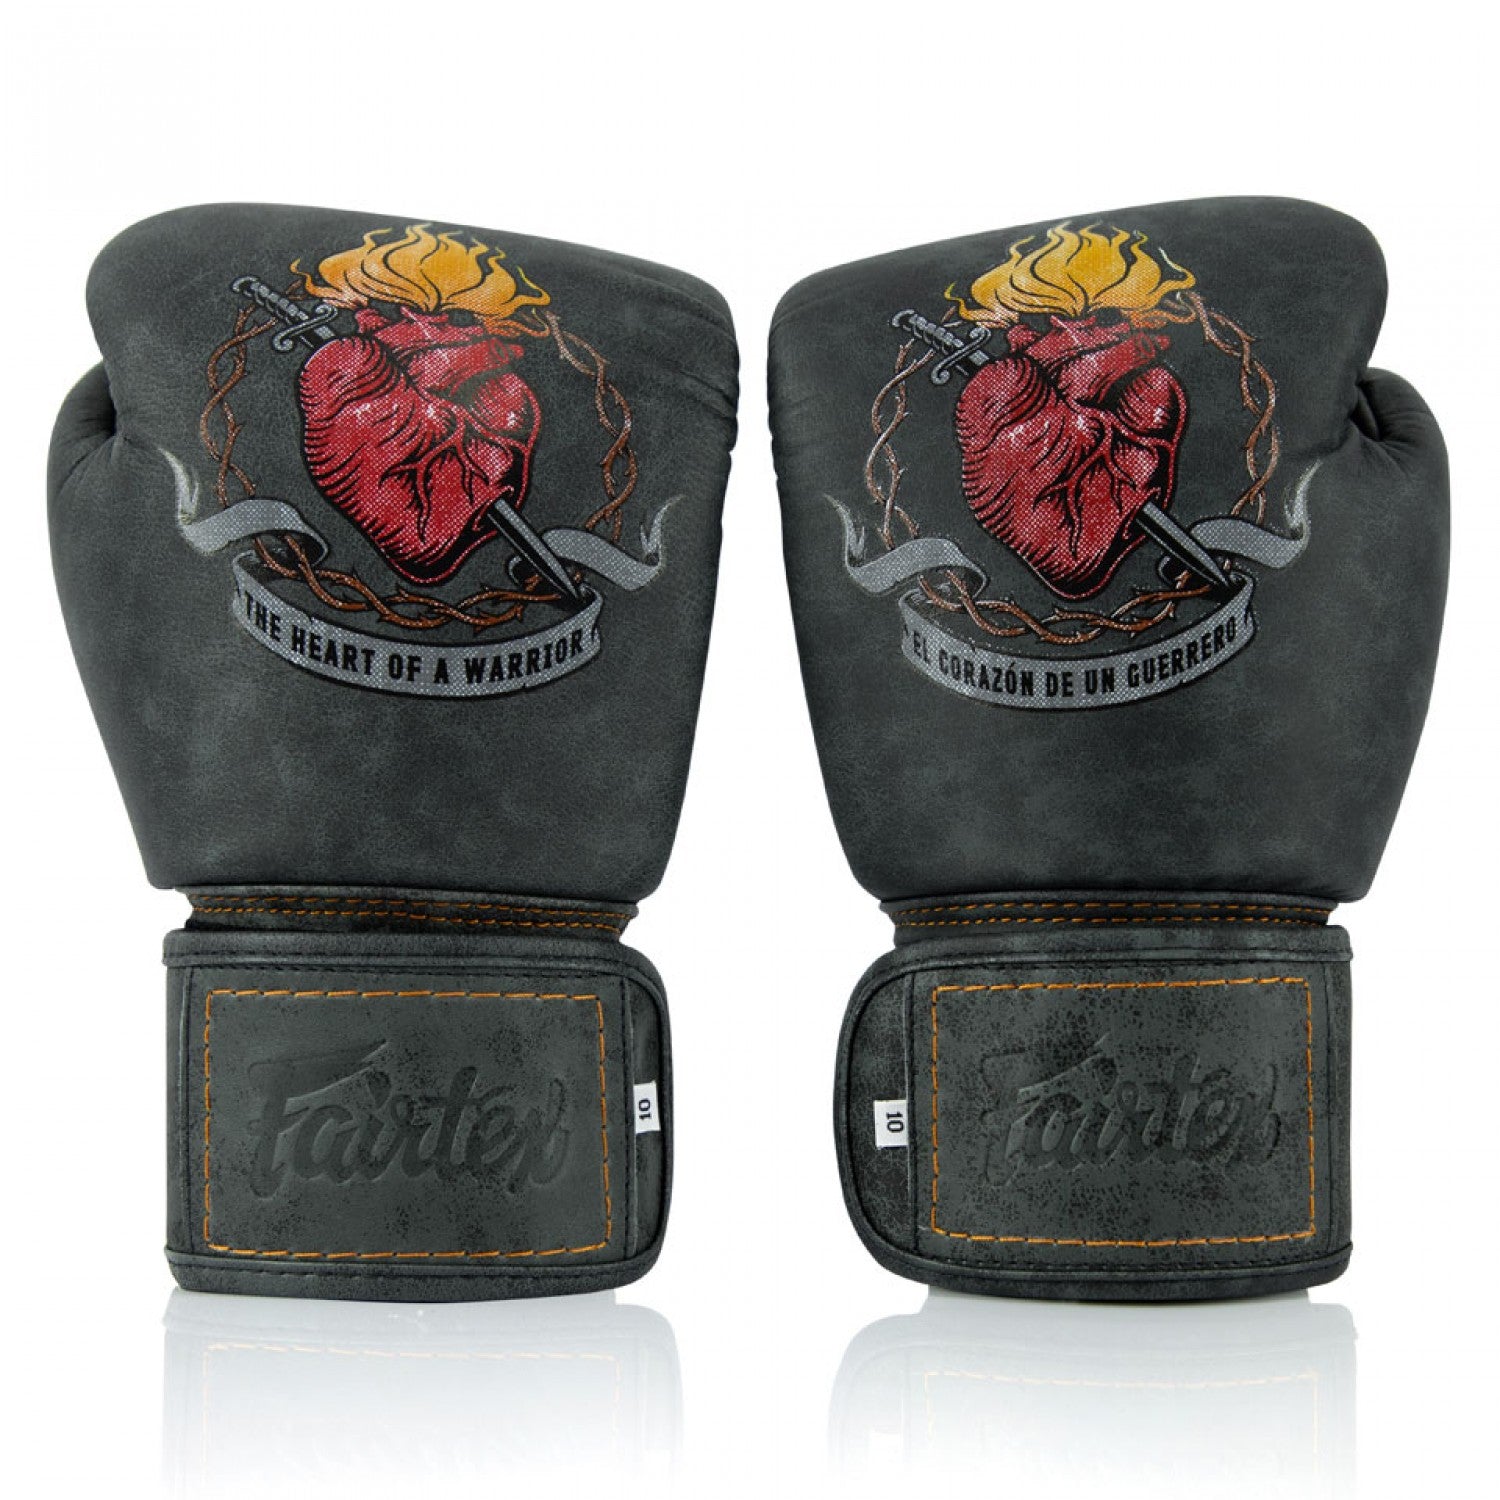 Fairtex Boxing Gloves Collections